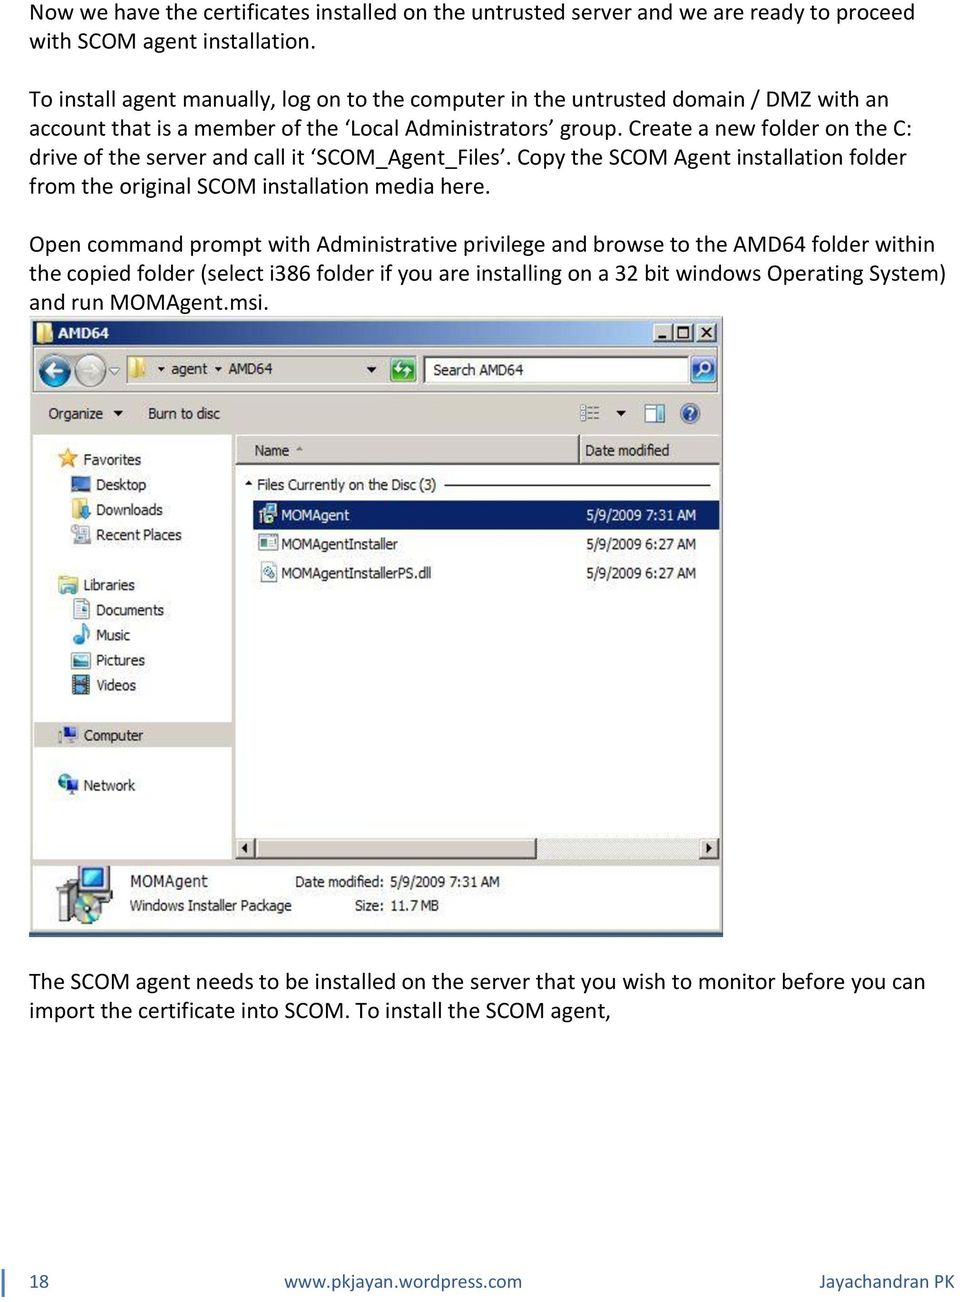 Create a new folder on the C: drive of the server and call it SCOM_Agent_Files. Copy the SCOM Agent installation folder from the original SCOM installation media here.